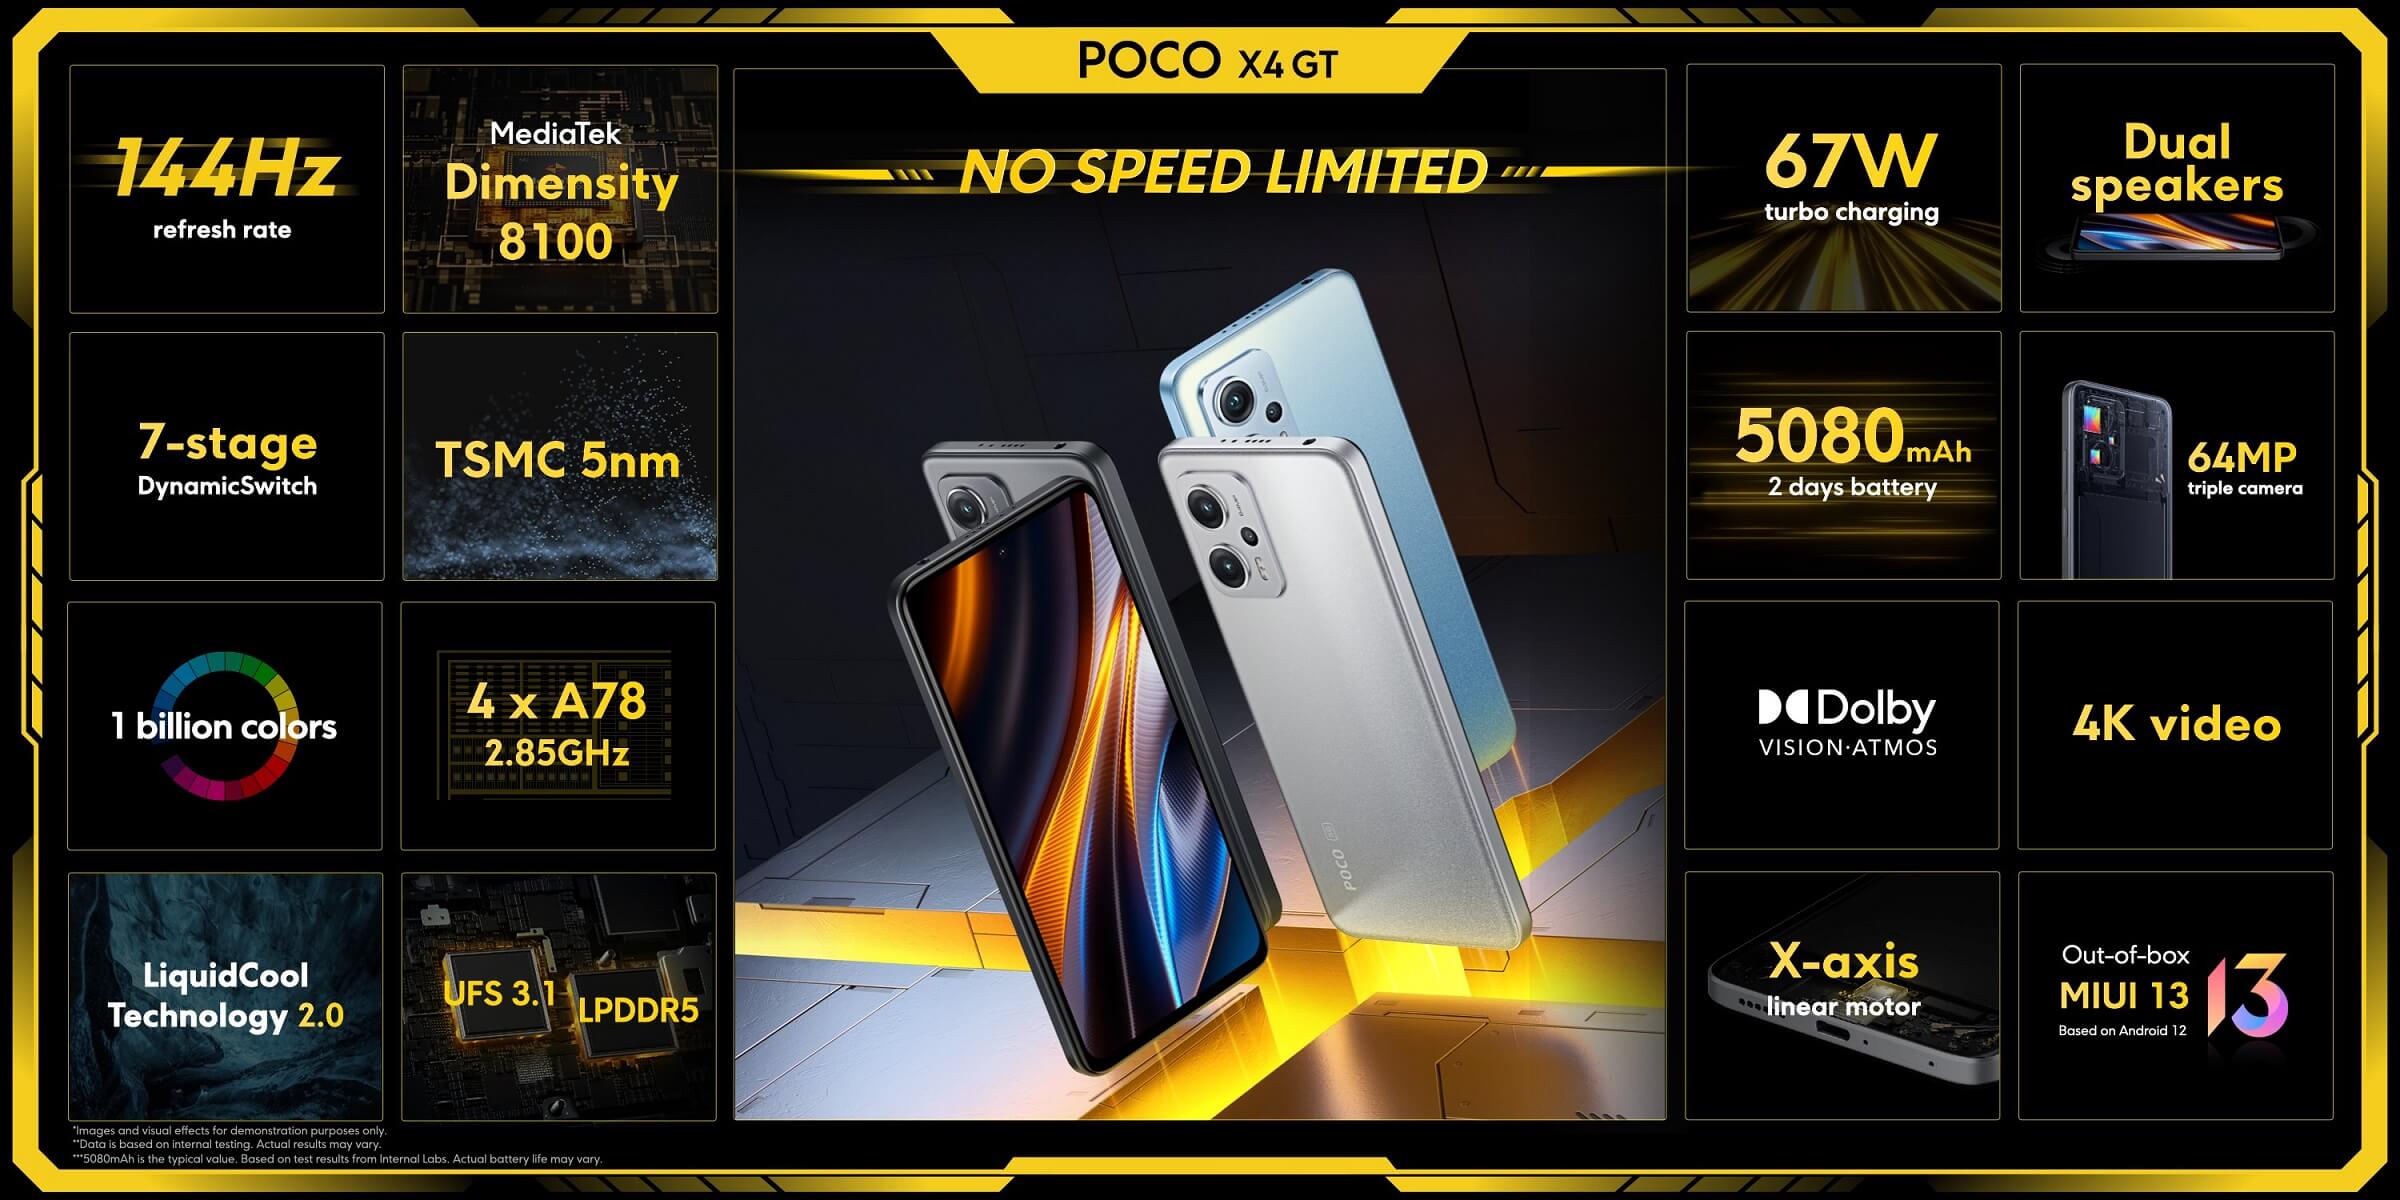 Poco X4 GT 5G feature global